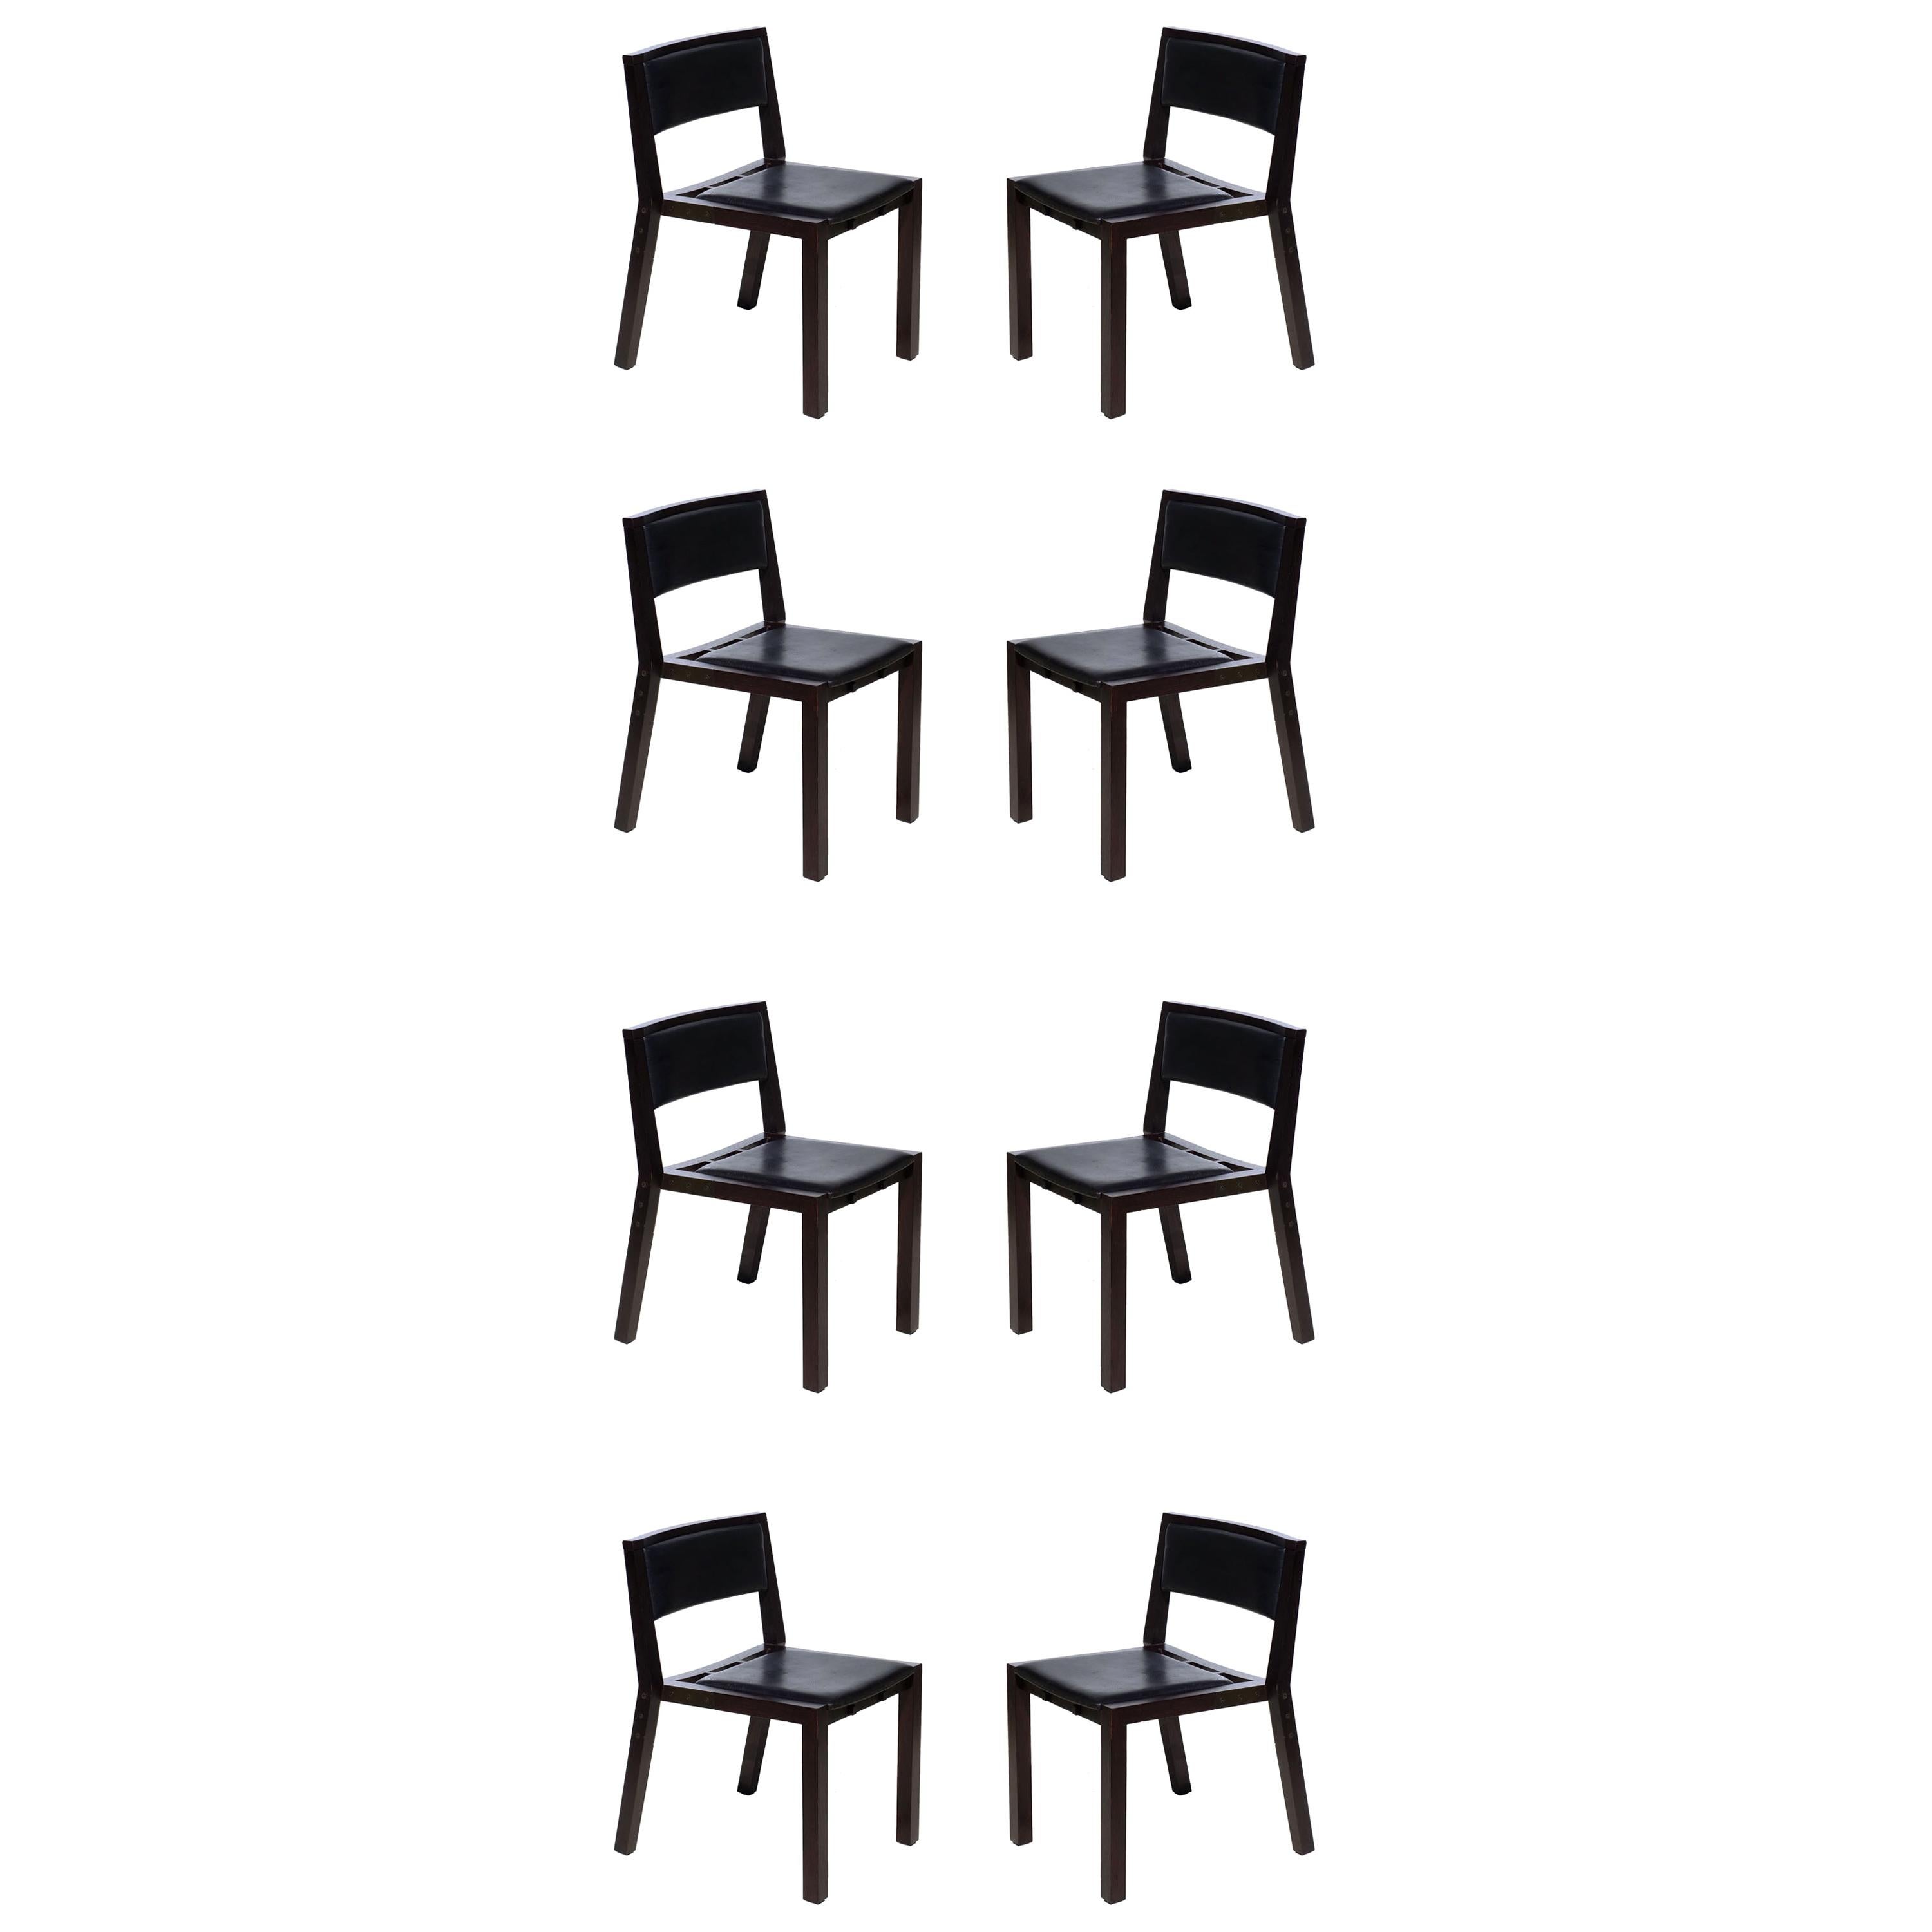 Grand Louvre Side Chair by Jean-Michel Wilmotte for Tecno, Set of 8 For Sale